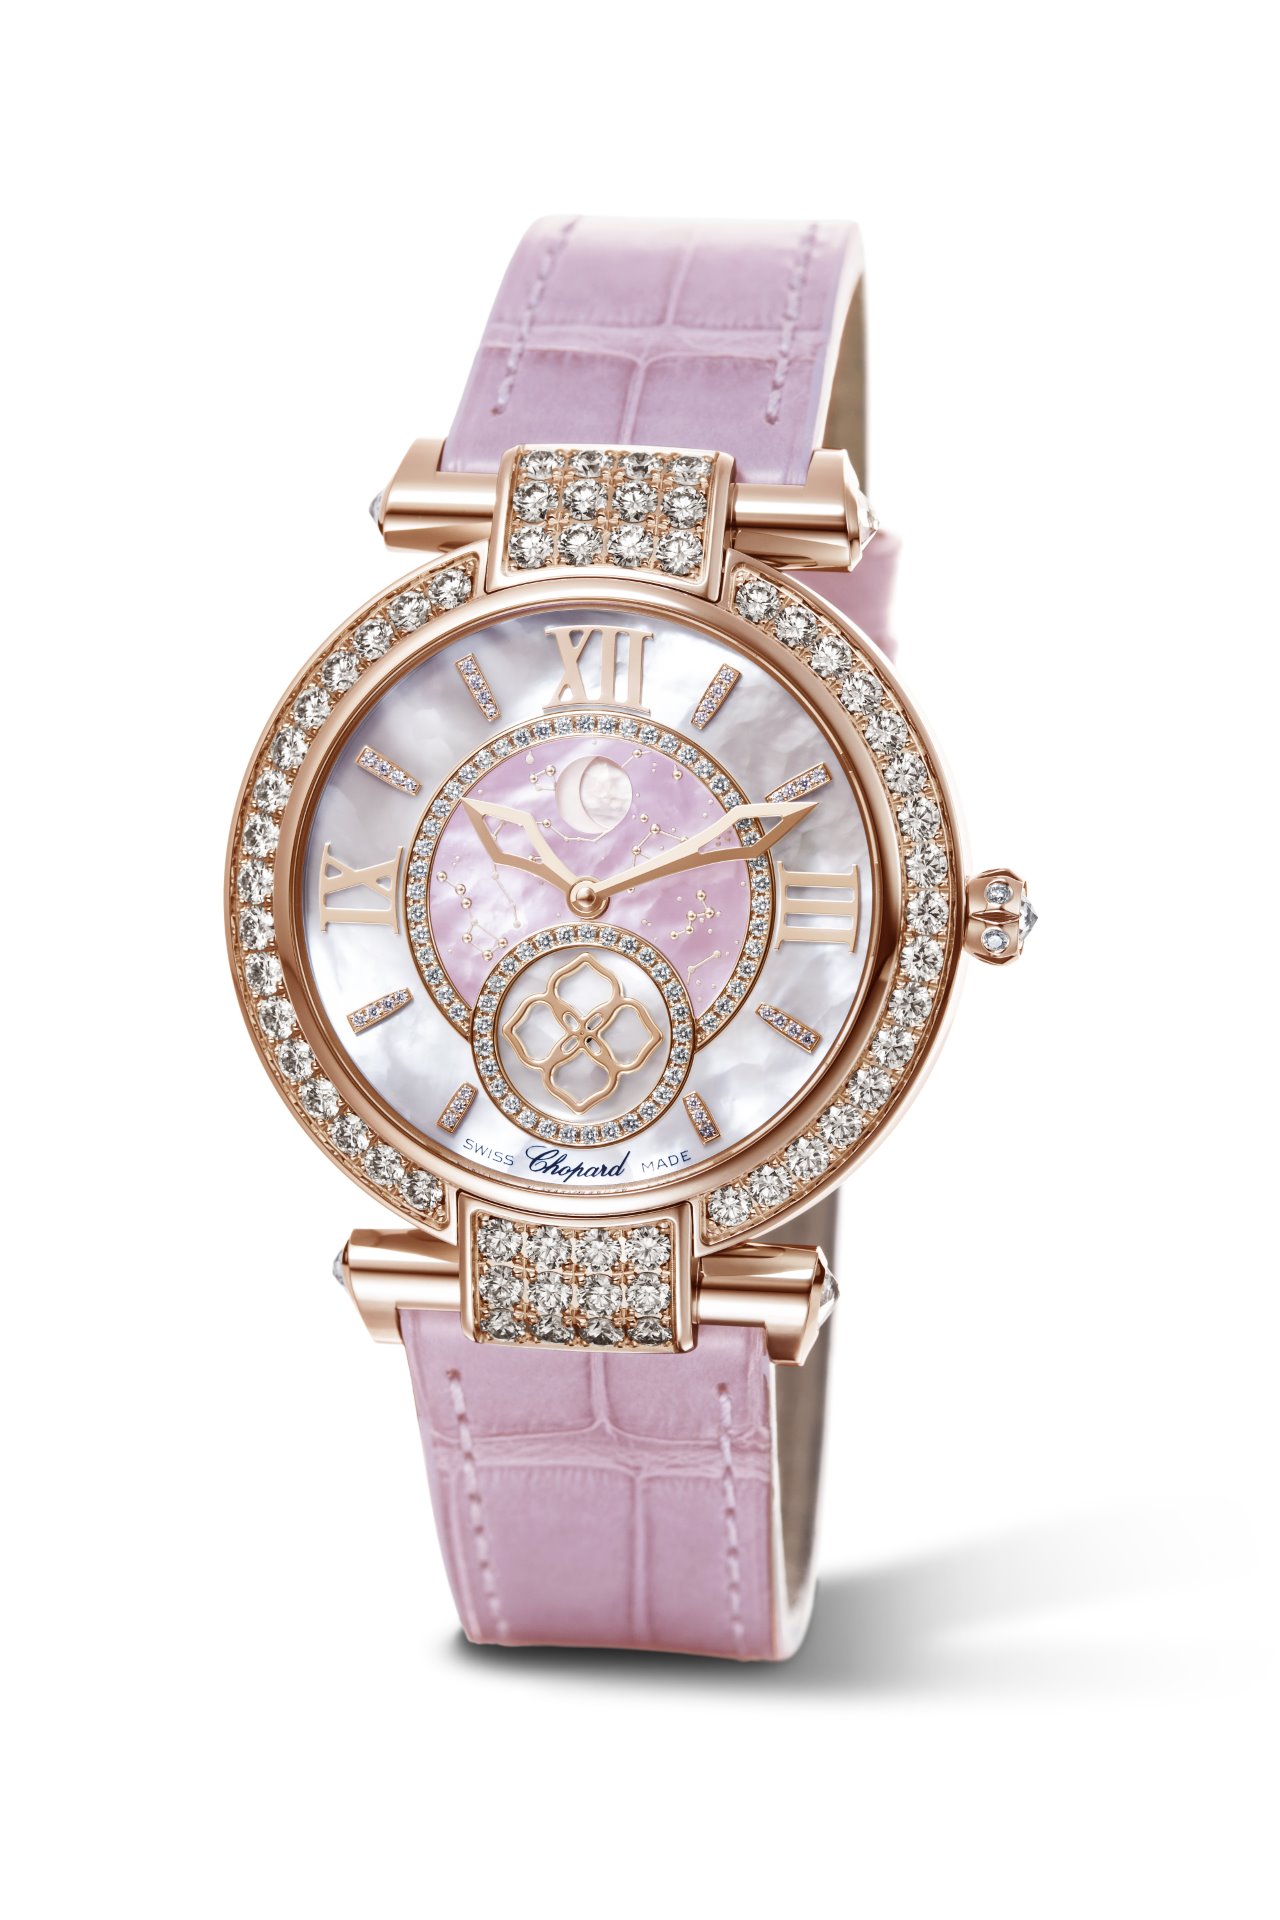 Chopard IMPERIALE Moonphase - Watch I Love